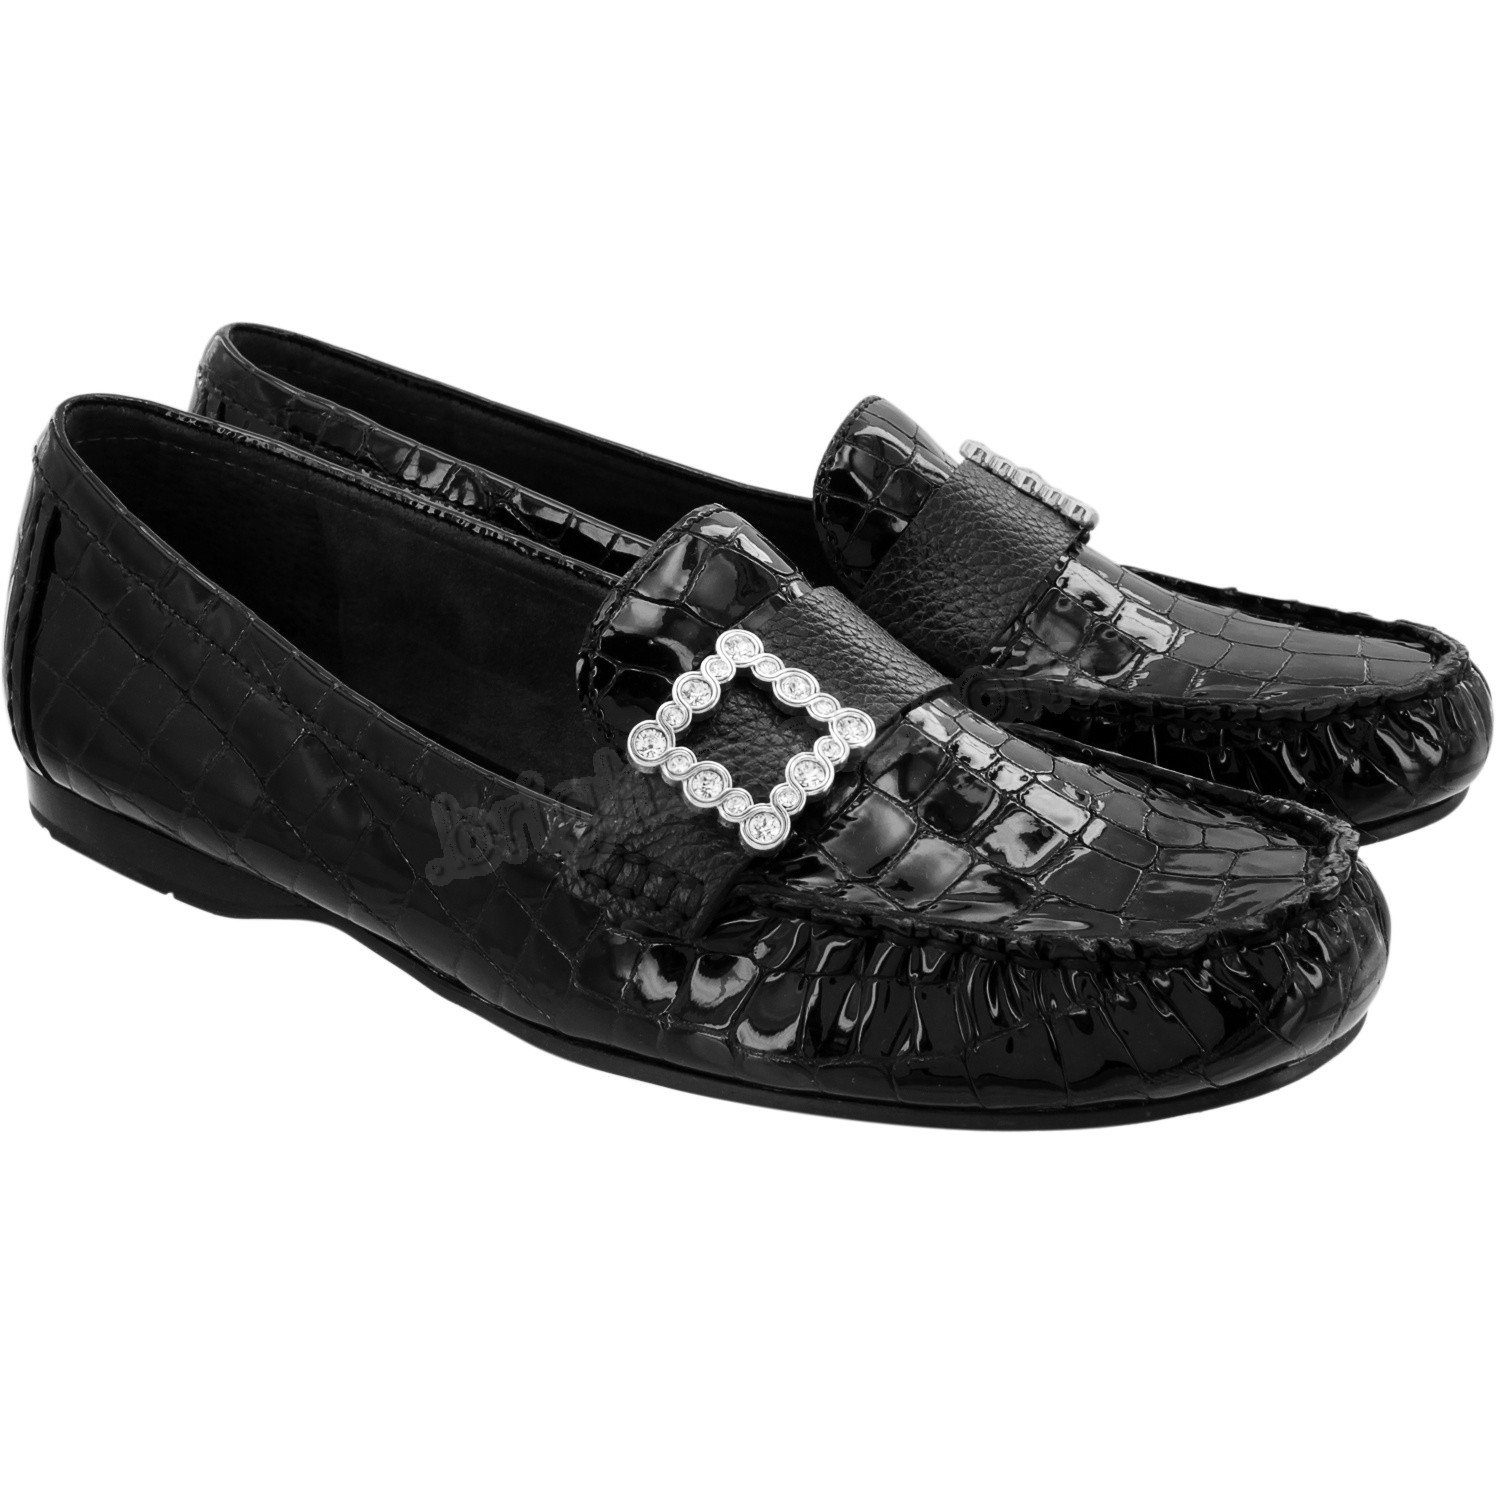 Brighton Collectibles & Online Discount Evelyn Mules - Brighton Collectibles & Online Discount Evelyn Mules